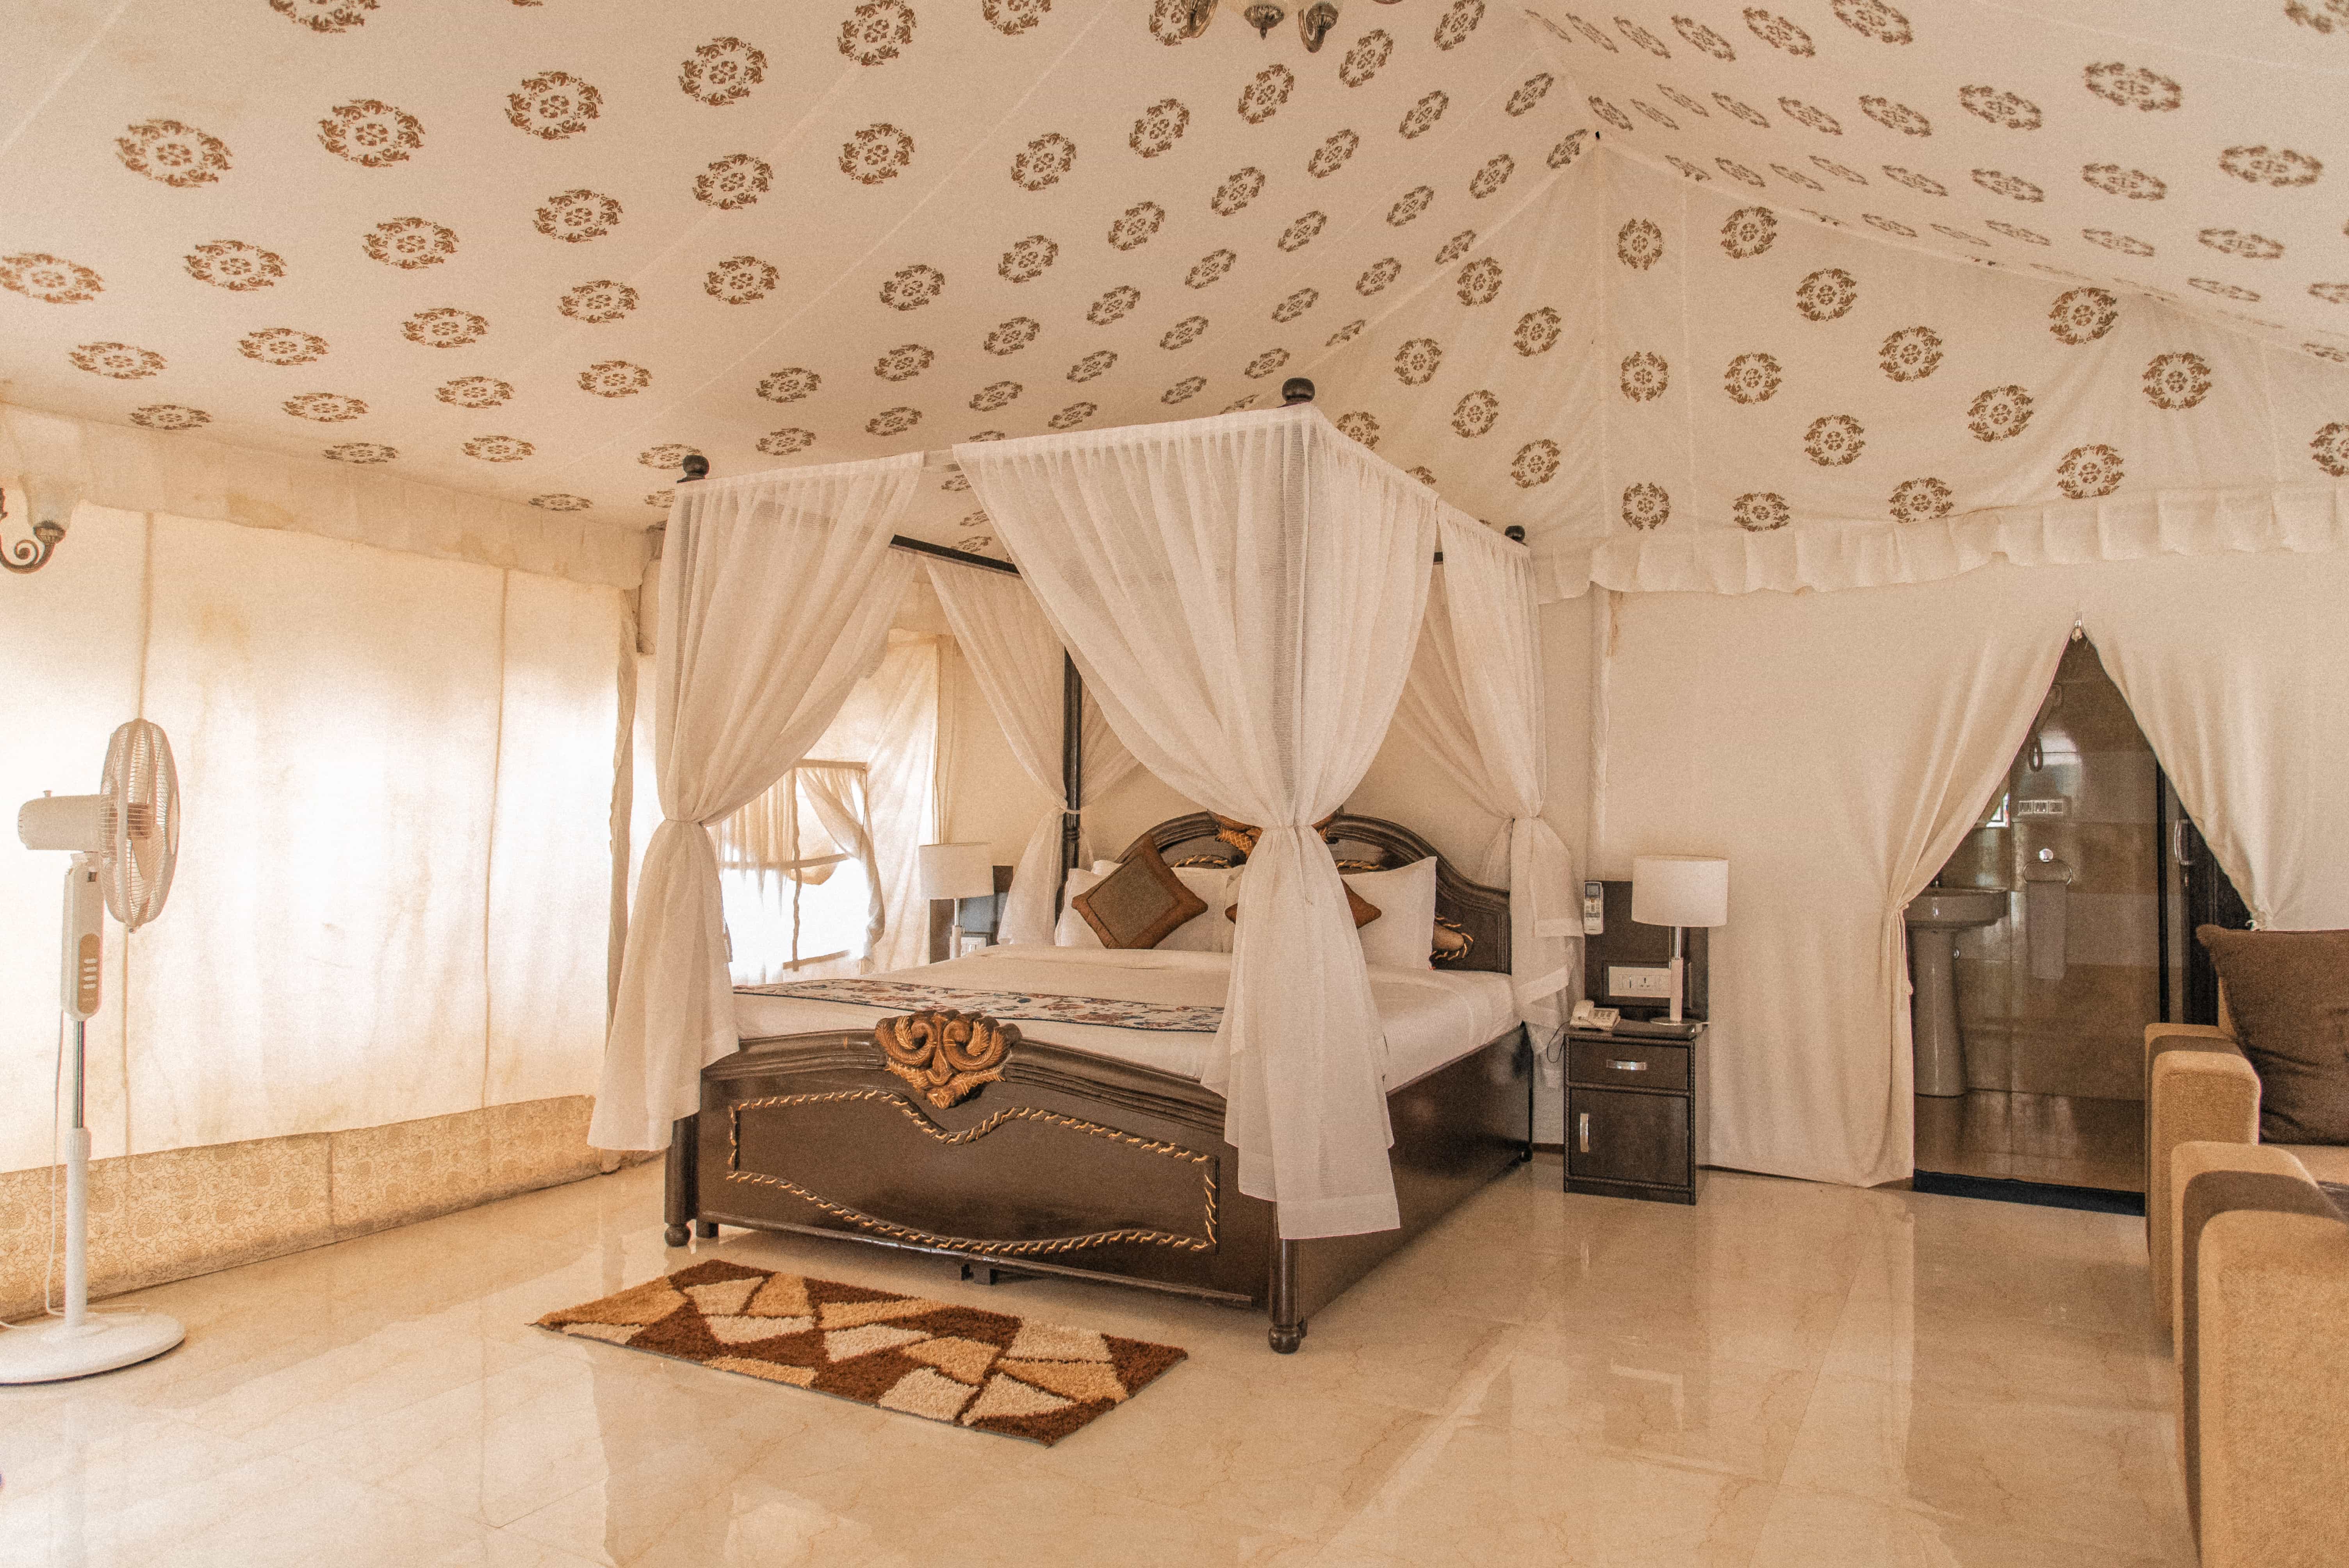 Where to stay in Pushkar, Rawai Luxury tents